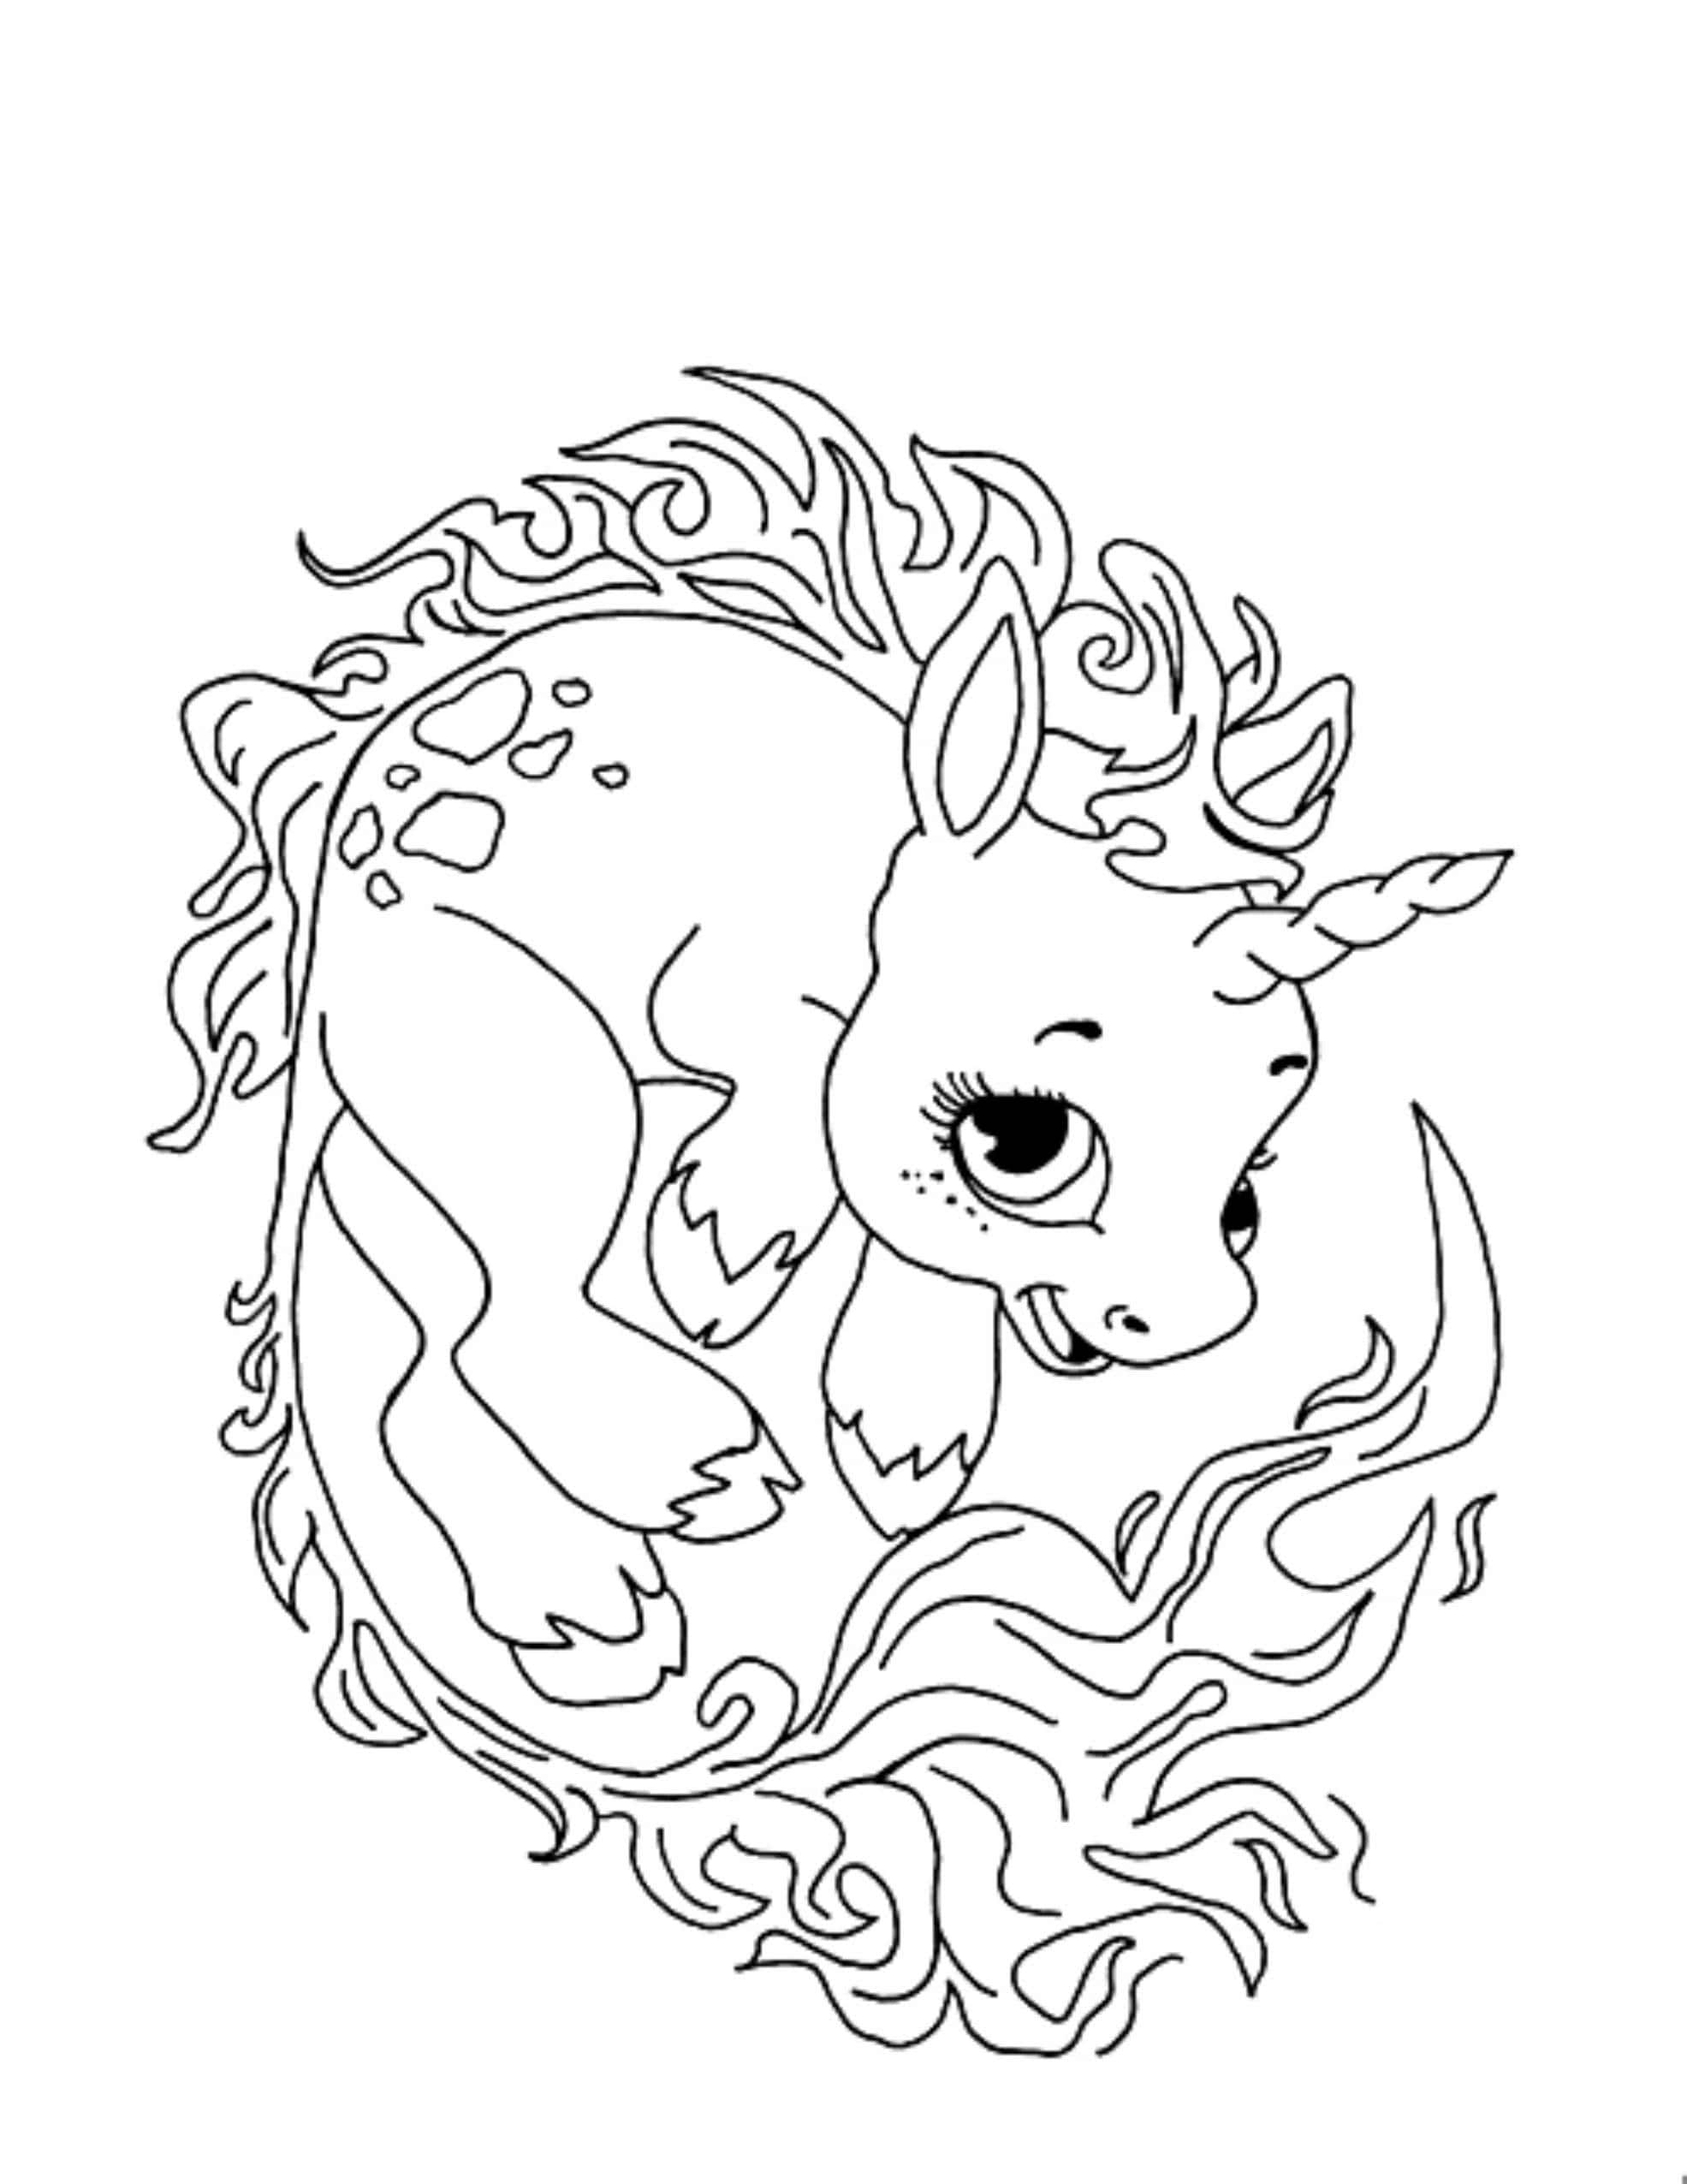 Unicorn Color Page Unicorn Coloring Pages 100 Black And White Pictures Print Themonline